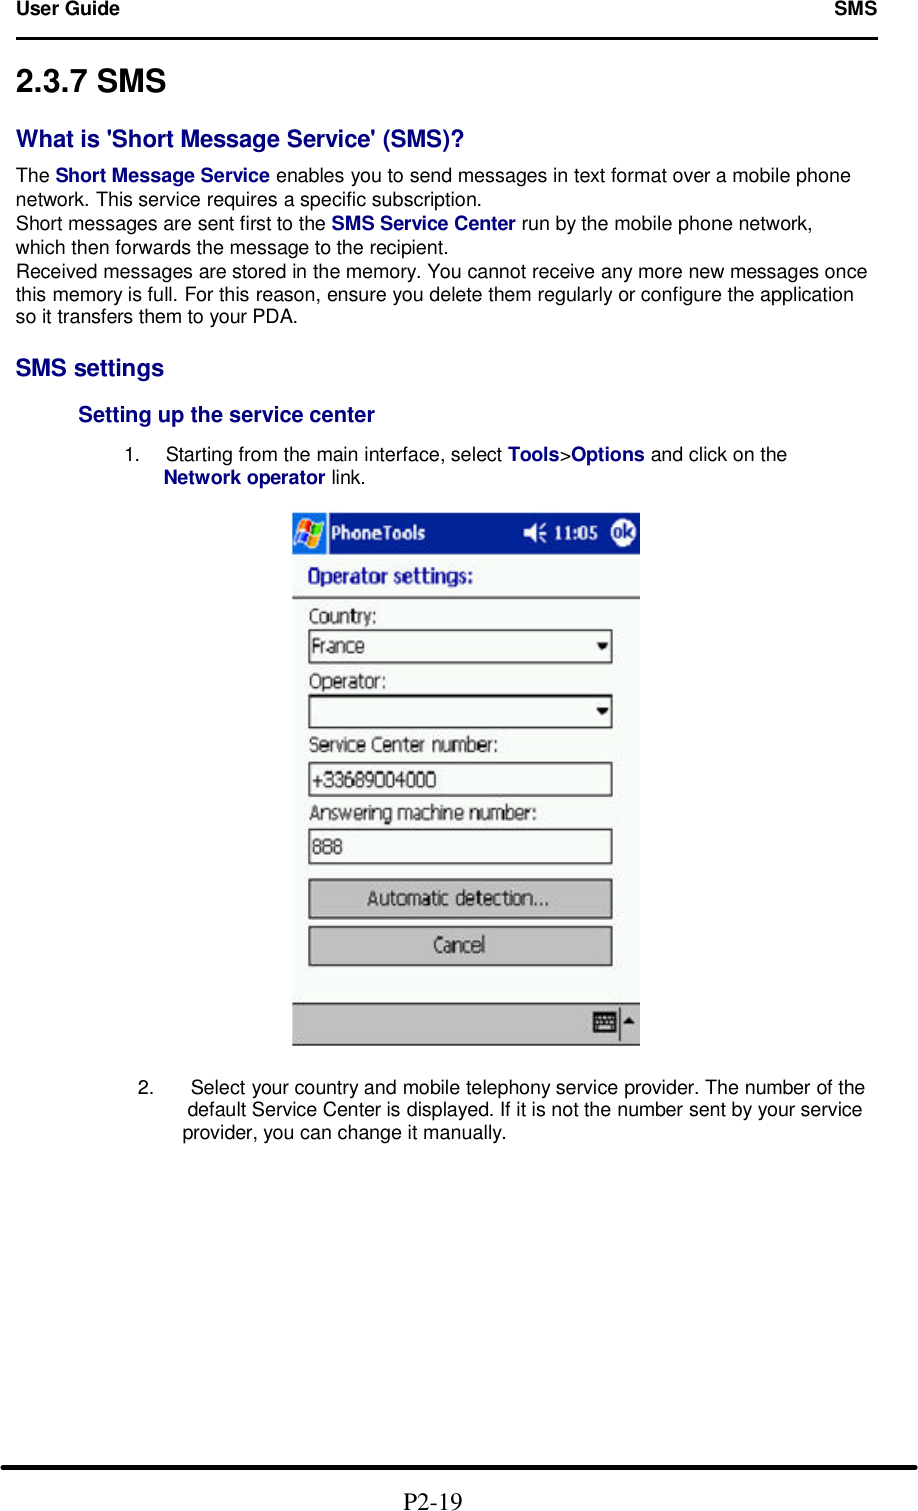 User Guide   SMS                                                                        2.3.7 SMS  What is &apos;Short Message Service&apos; (SMS)?  The Short Message Service enables you to send messages in text format over a mobile phone network. This service requires a specific subscription. Short messages are sent first to the SMS Service Center run by the mobile phone network, which then forwards the message to the recipient. Received messages are stored in the memory. You cannot receive any more new messages once this memory is full. For this reason, ensure you delete them regularly or configure the application so it transfers them to your PDA.  SMS settings           Setting up the service center        1. Starting from the main interface, select Tools&gt;Options and click on the       Network operator link.    2. Select your country and mobile telephony service provider. The number of the      default Service Center is displayed. If it is not the number sent by your service        provider, you can change it manually.                                              P2-19   